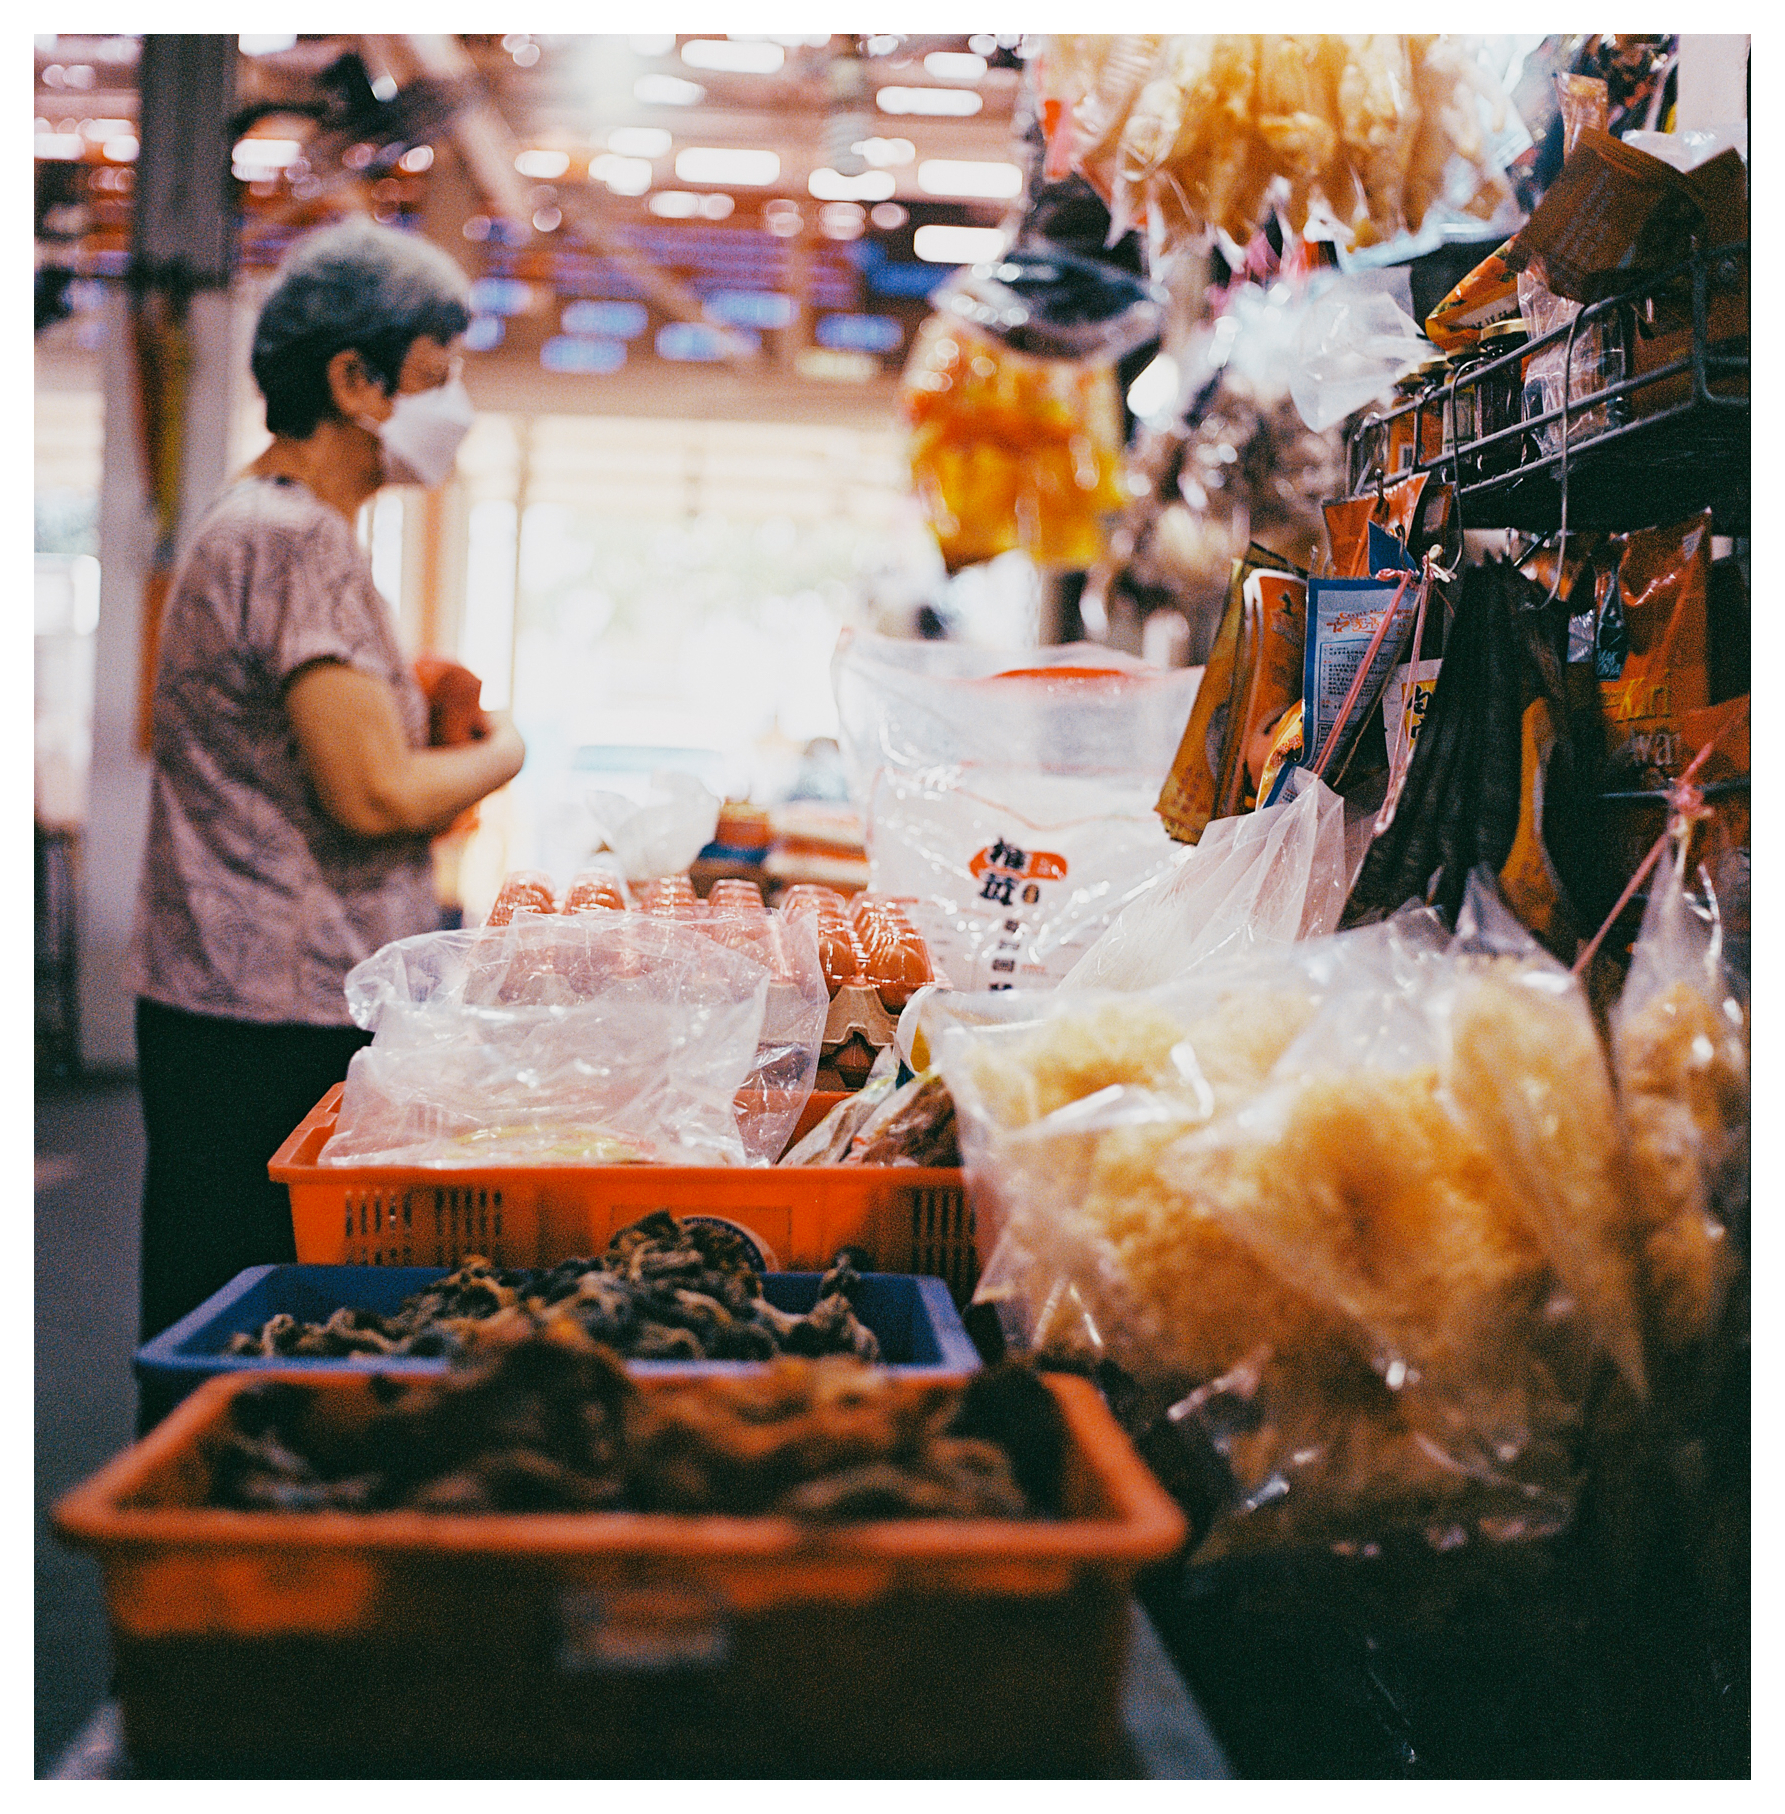 A scan of a medium format square color photo of an older Chinese lady wearing a face mask standing at a stall in Singapore looking at dried goods to purchase